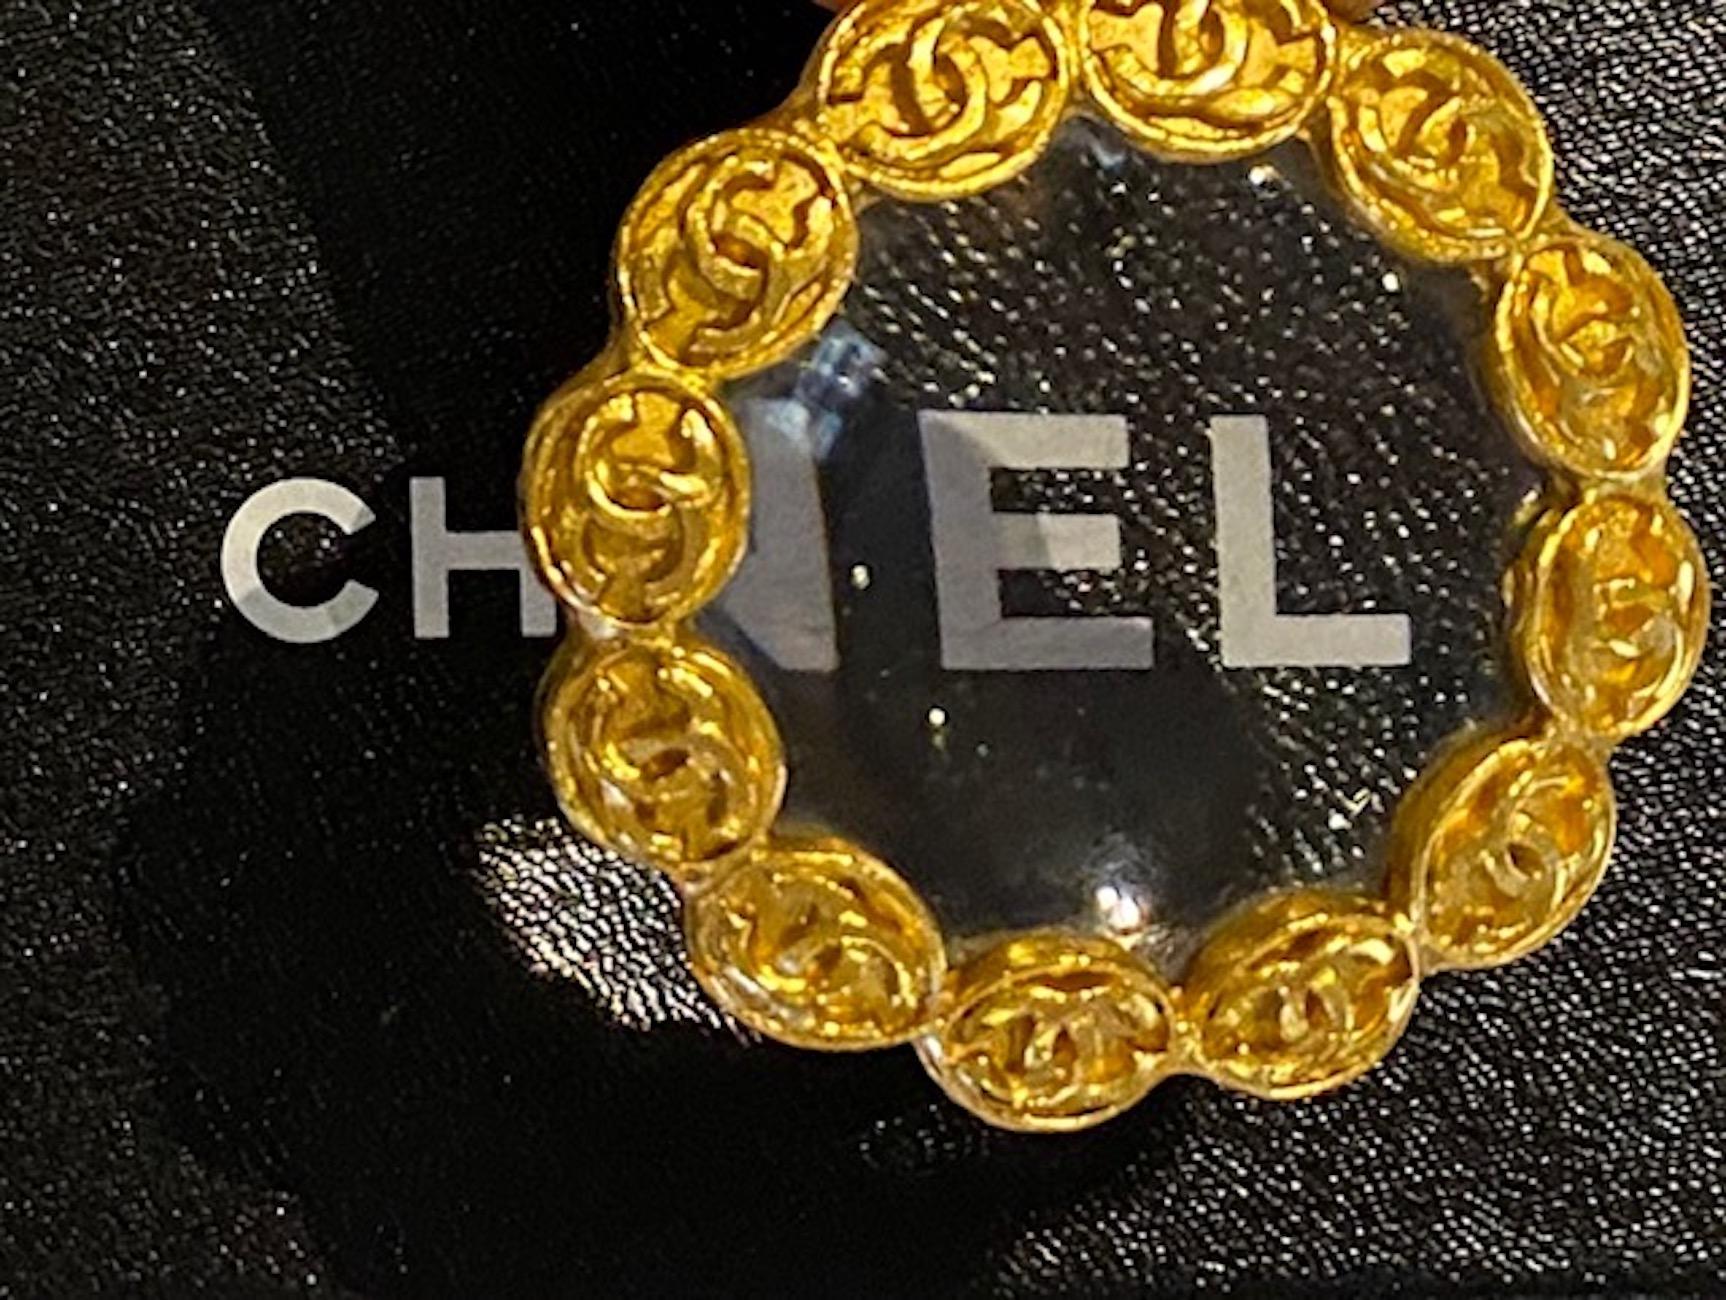 Chanel Magnifying Lens Pendant Necklace, Autumn 1997 Collection 11